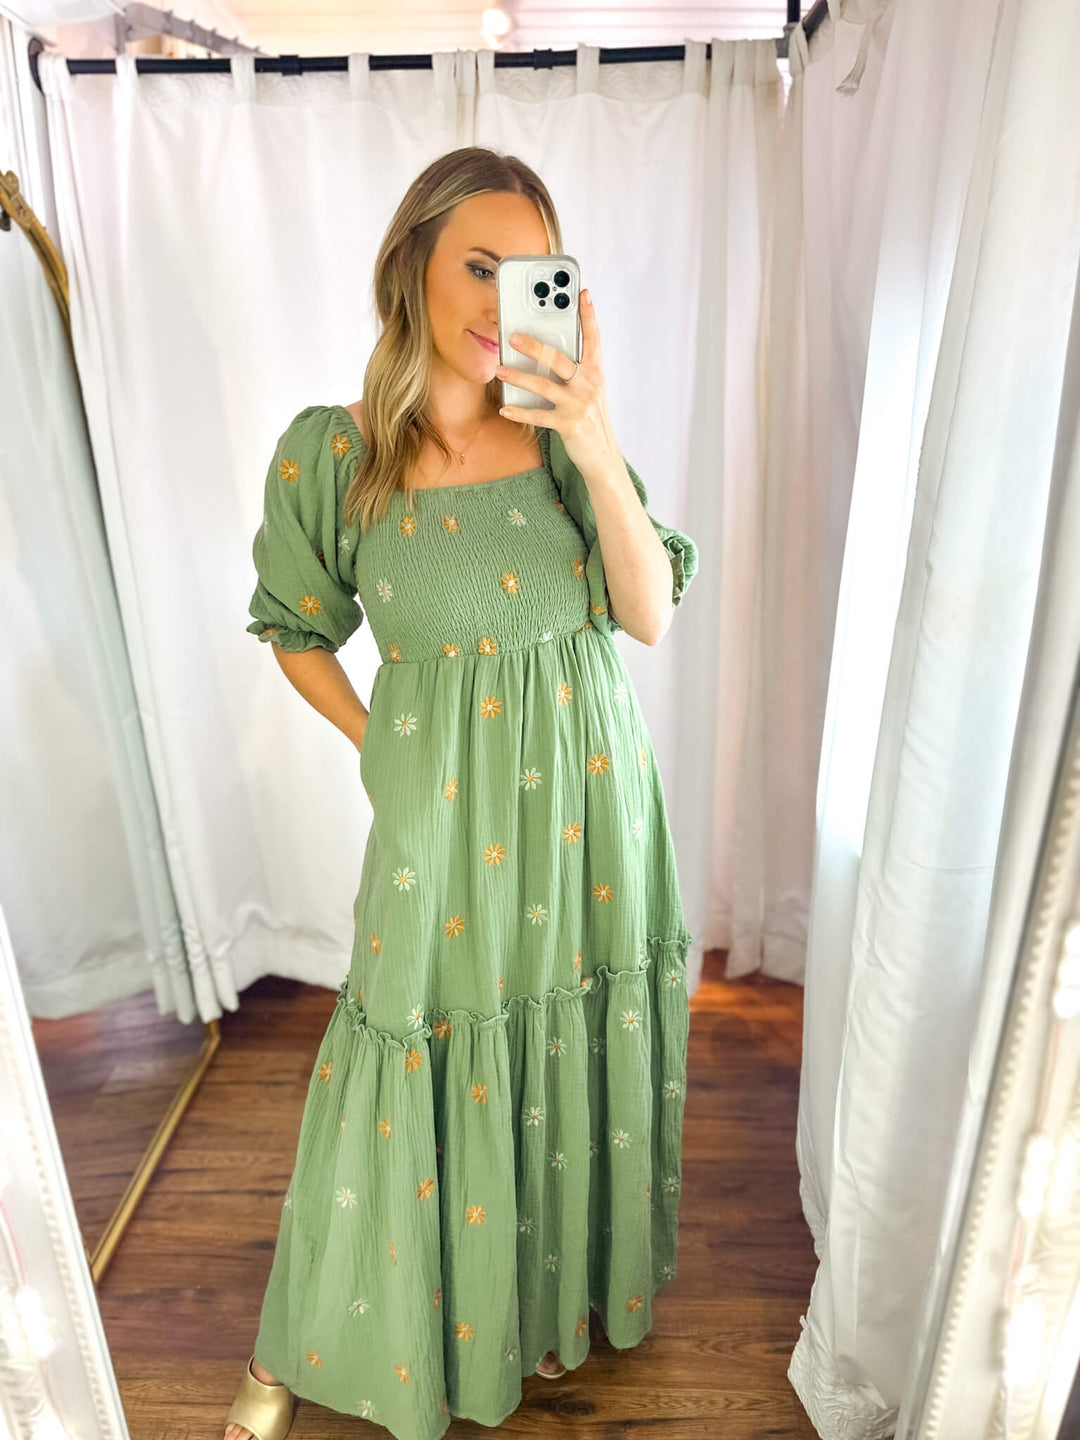 Dahlia Floral Embroidered Maxi Dress